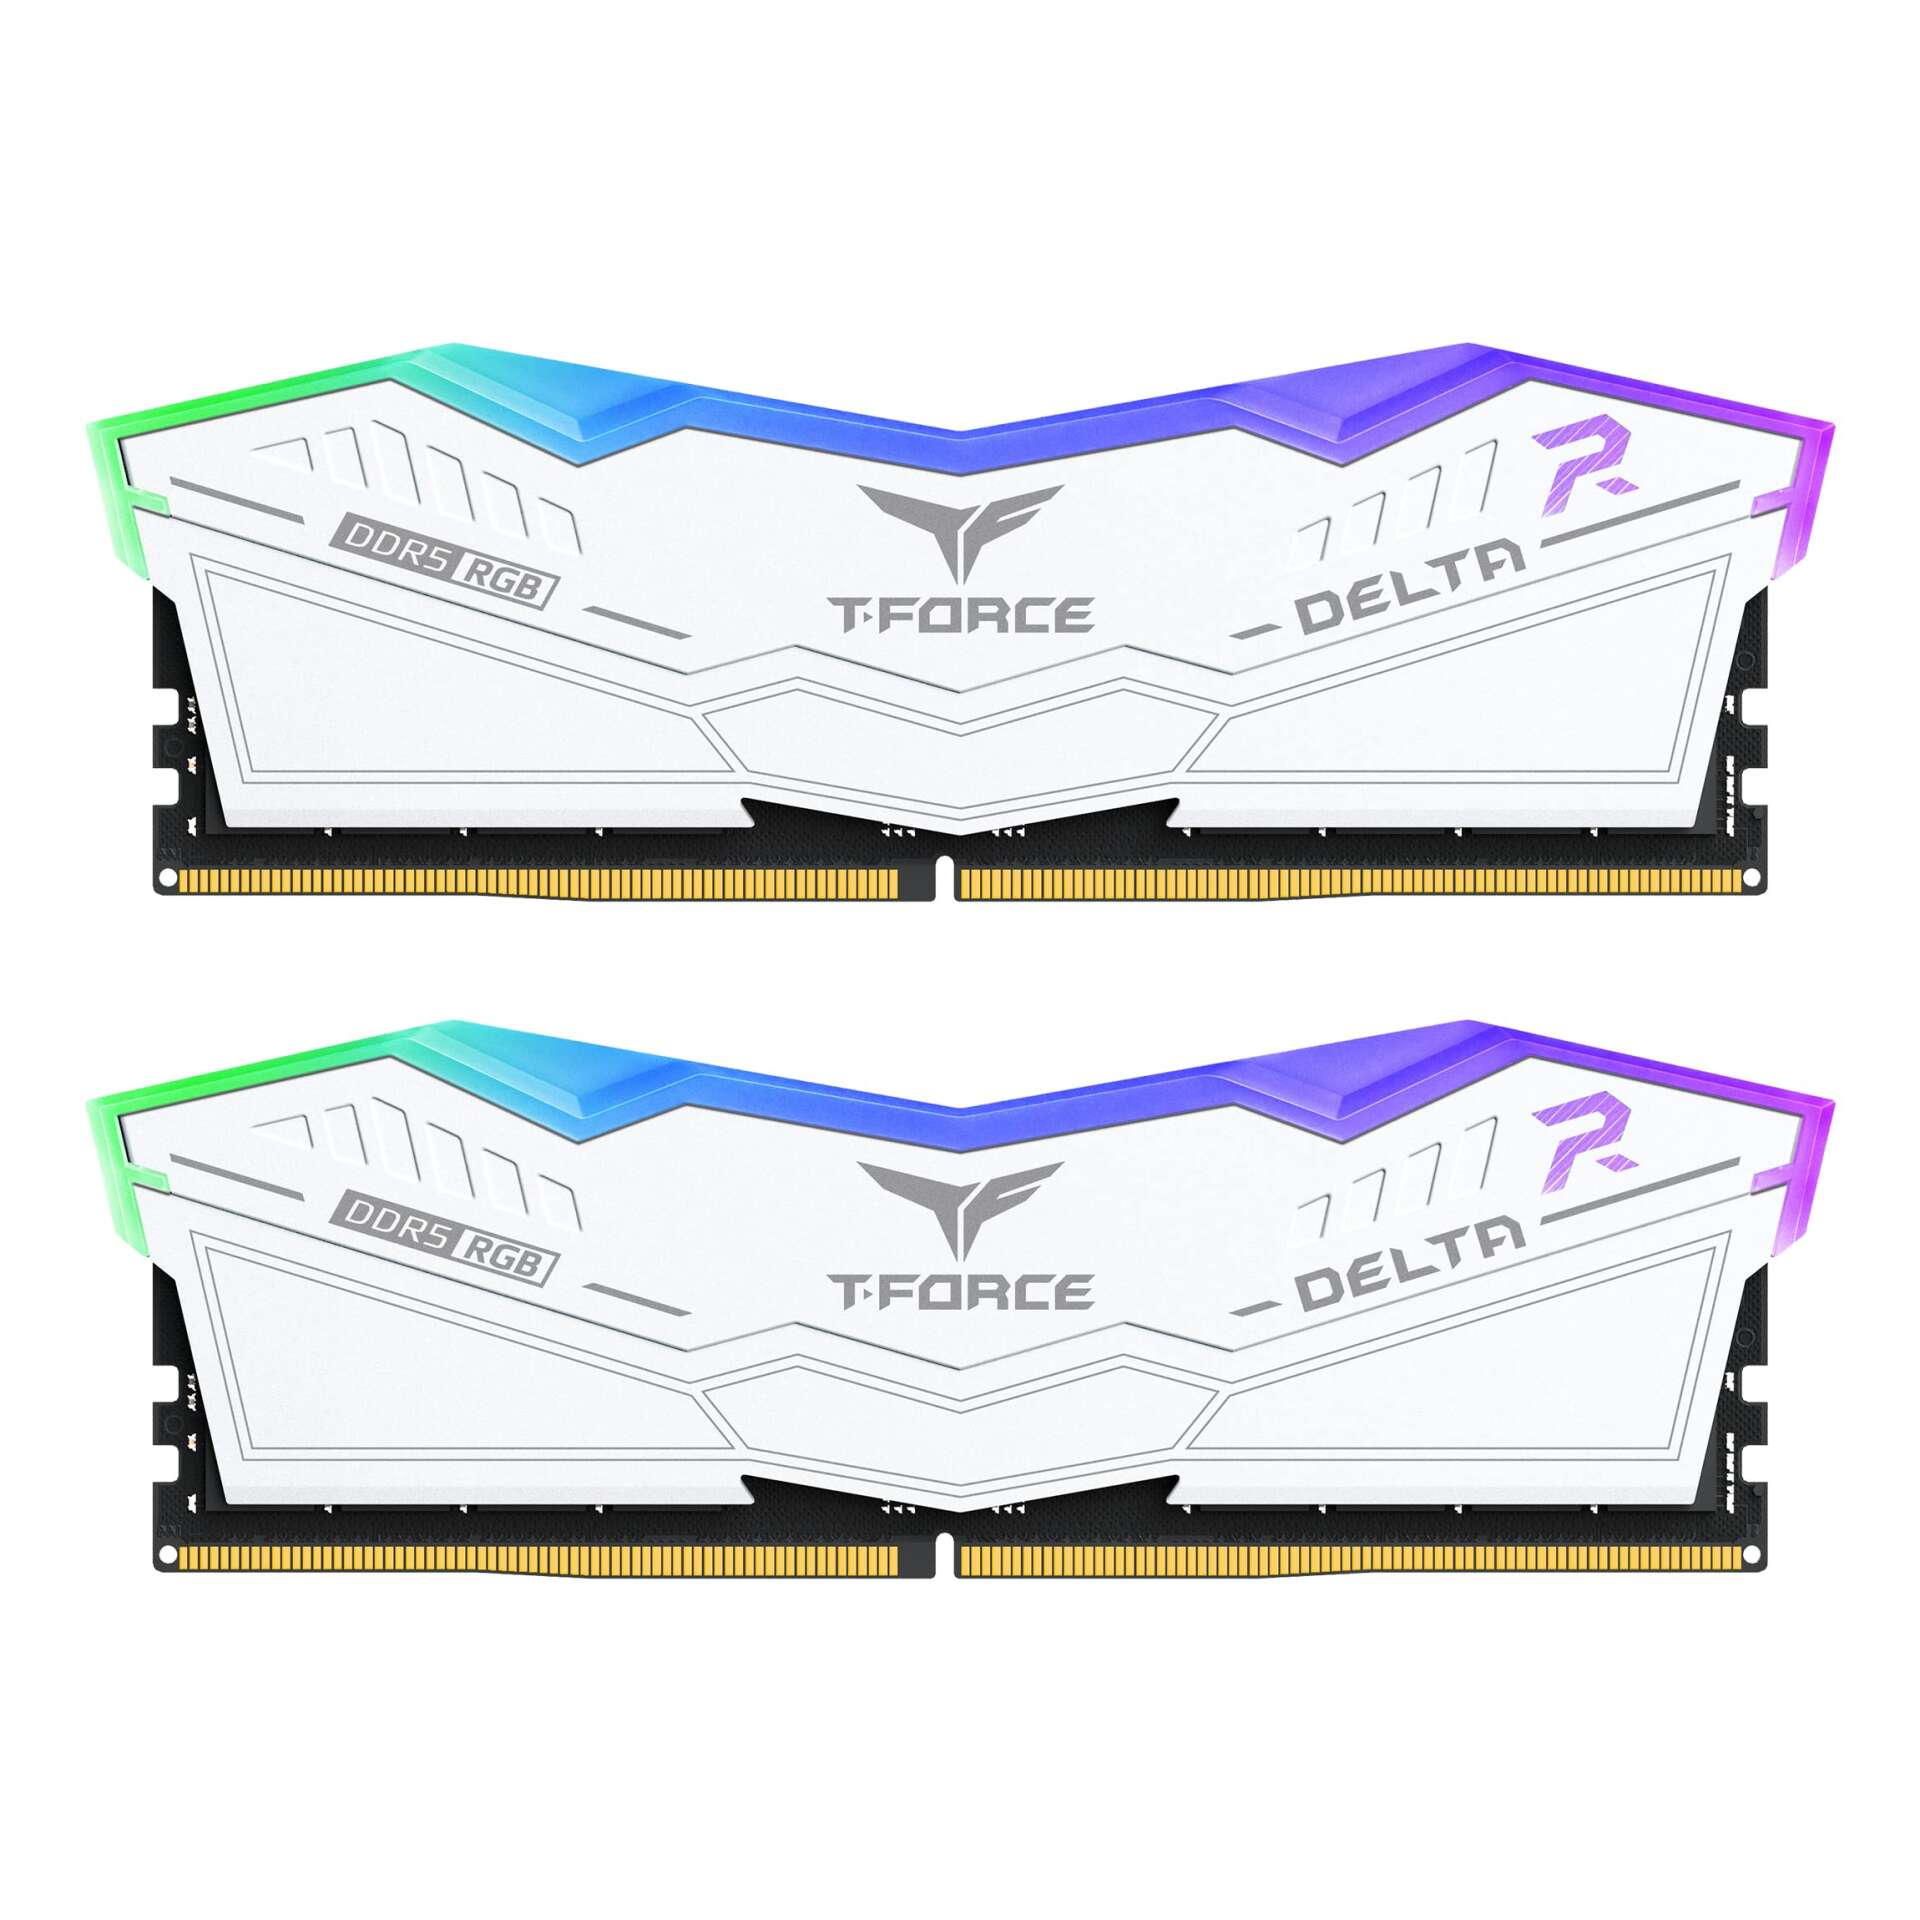 Teamgroup 48gb / 8200 t-force delta rgb white ddr5 ram kit (2x24gb)